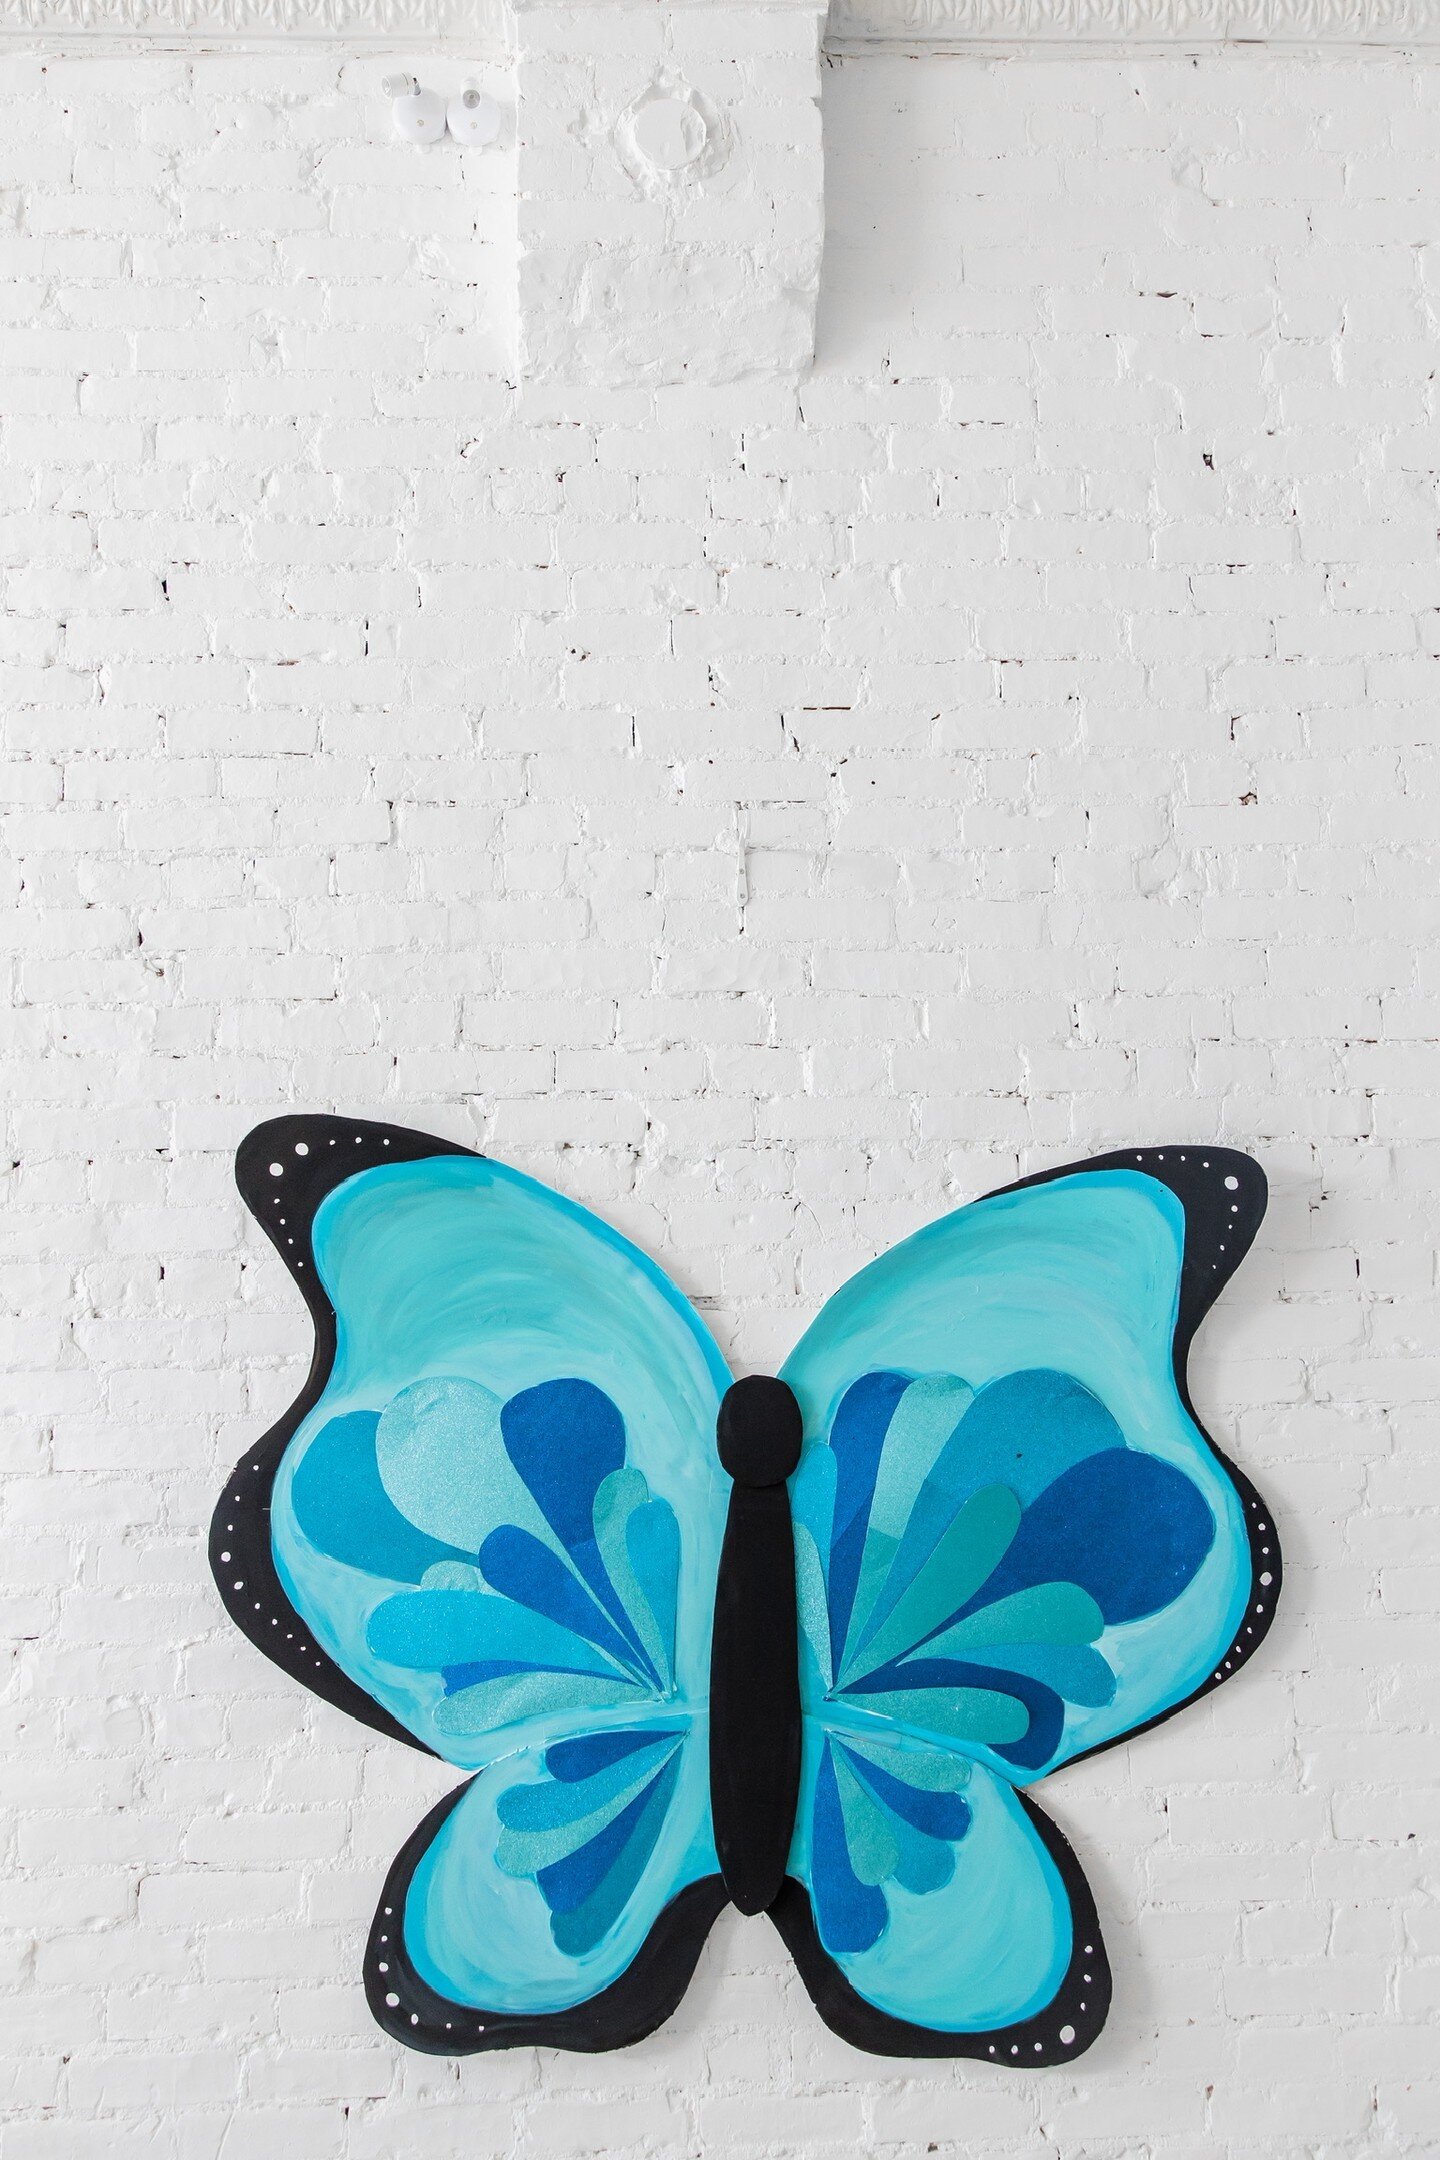 Even though Taylor Swift 𝓯𝓵𝓮𝔀 𝓪𝔀𝓪𝔂 to her next stop on her tour, she&rsquo;s still the talk of the town🦋 We are in love with this butterfly backdrop that goes perfectly with her first album debuting as Taylor Swift🎶 
*
*
*
#ohiopartyvenue #